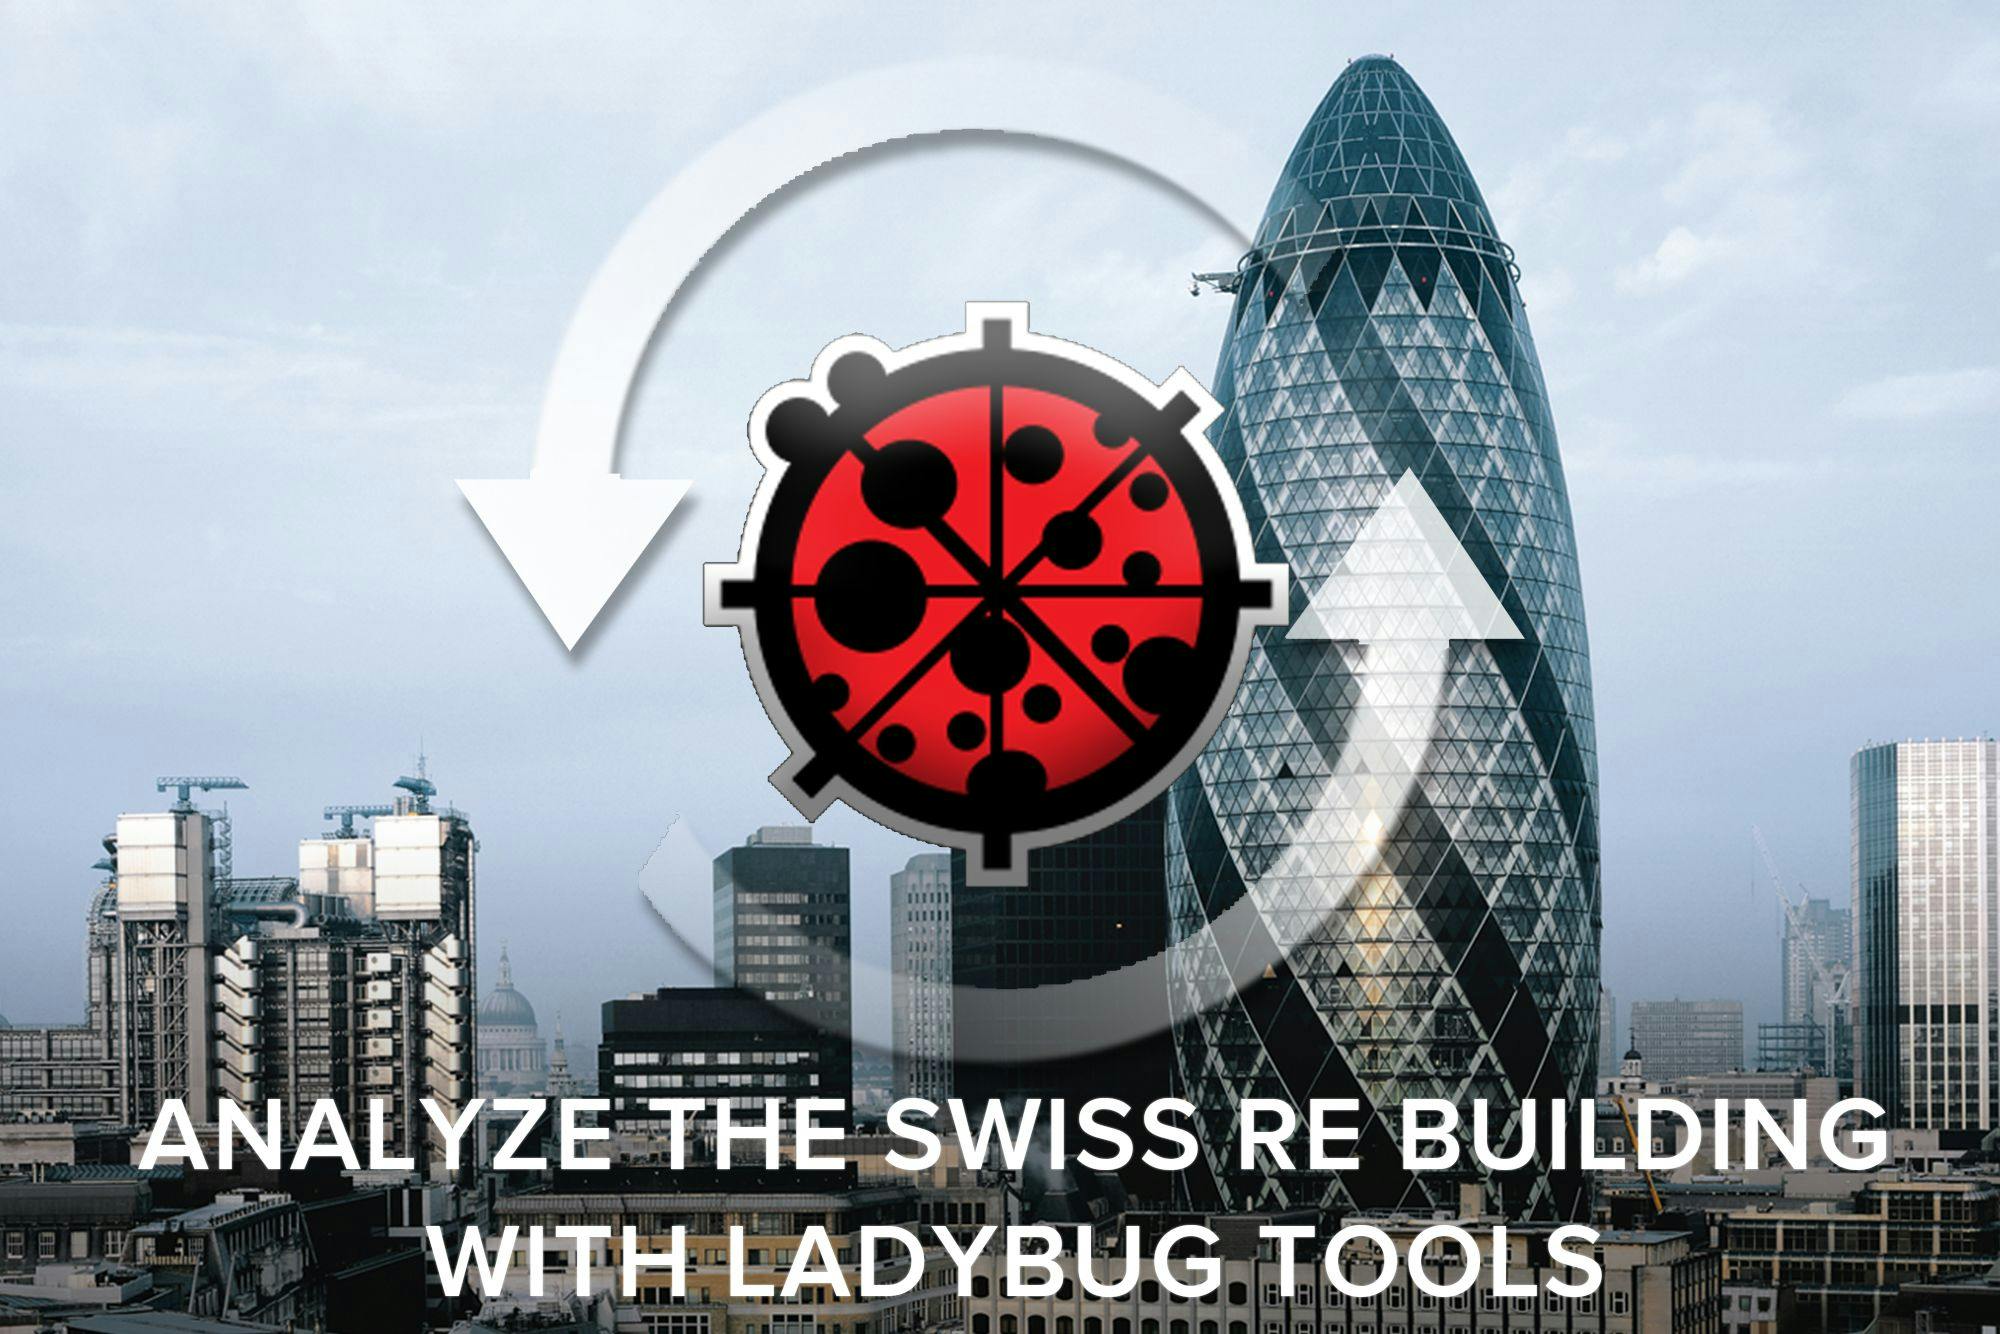 Sustainable Architecture 101: Launching Our Latest Course "Analyze the Swiss Re Building using Ladybug Tools"